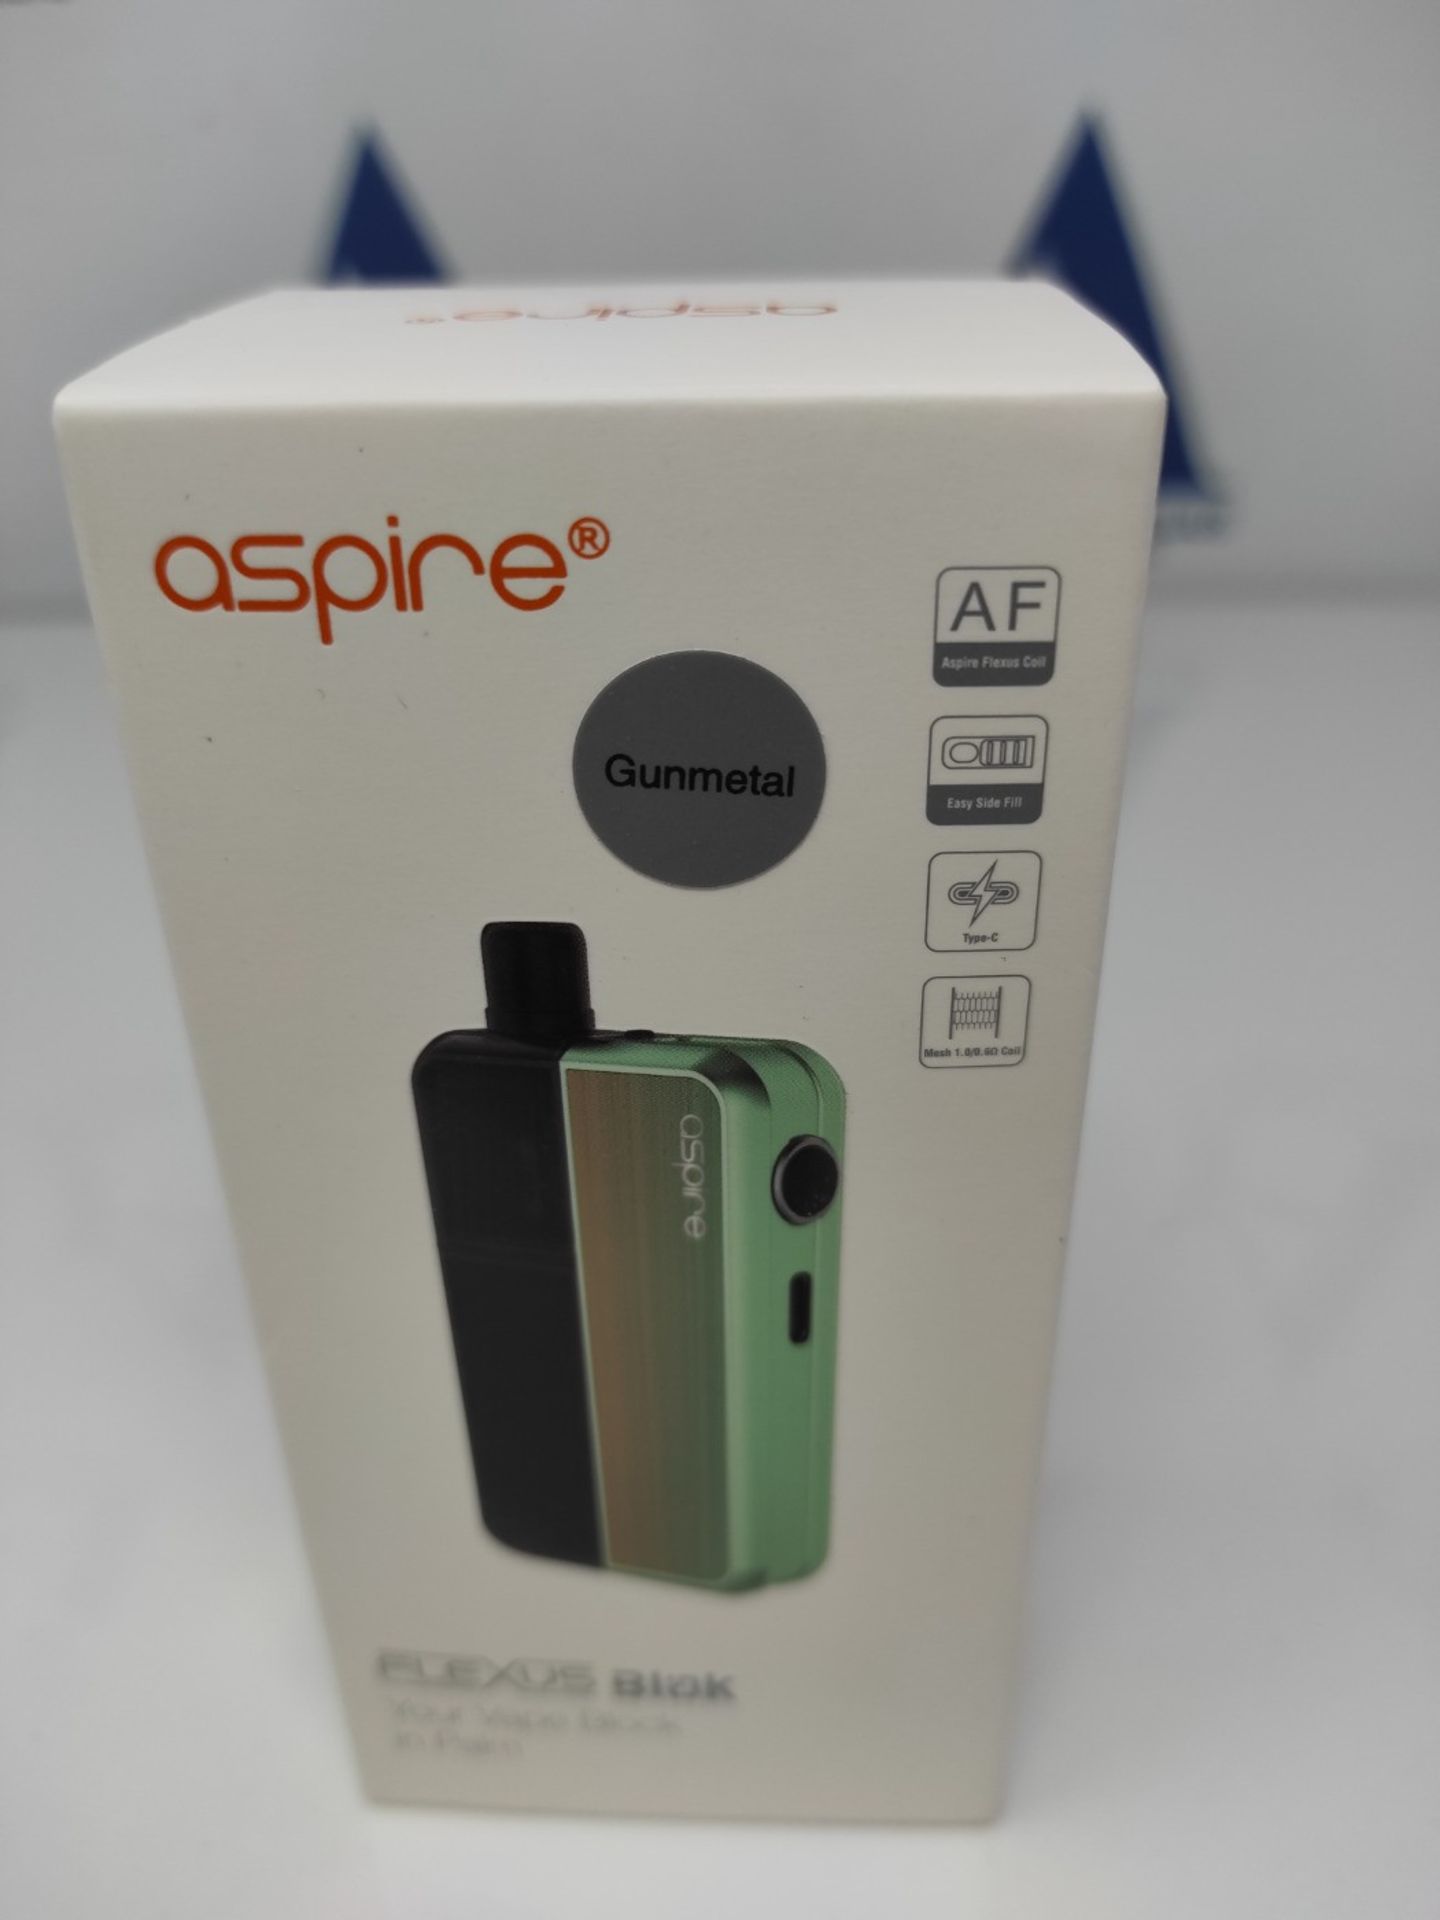 Aspire Flexus Block Electronic Cigarette Cheek and Lung Vaping - Complete Pod Mod Kit - Image 2 of 3